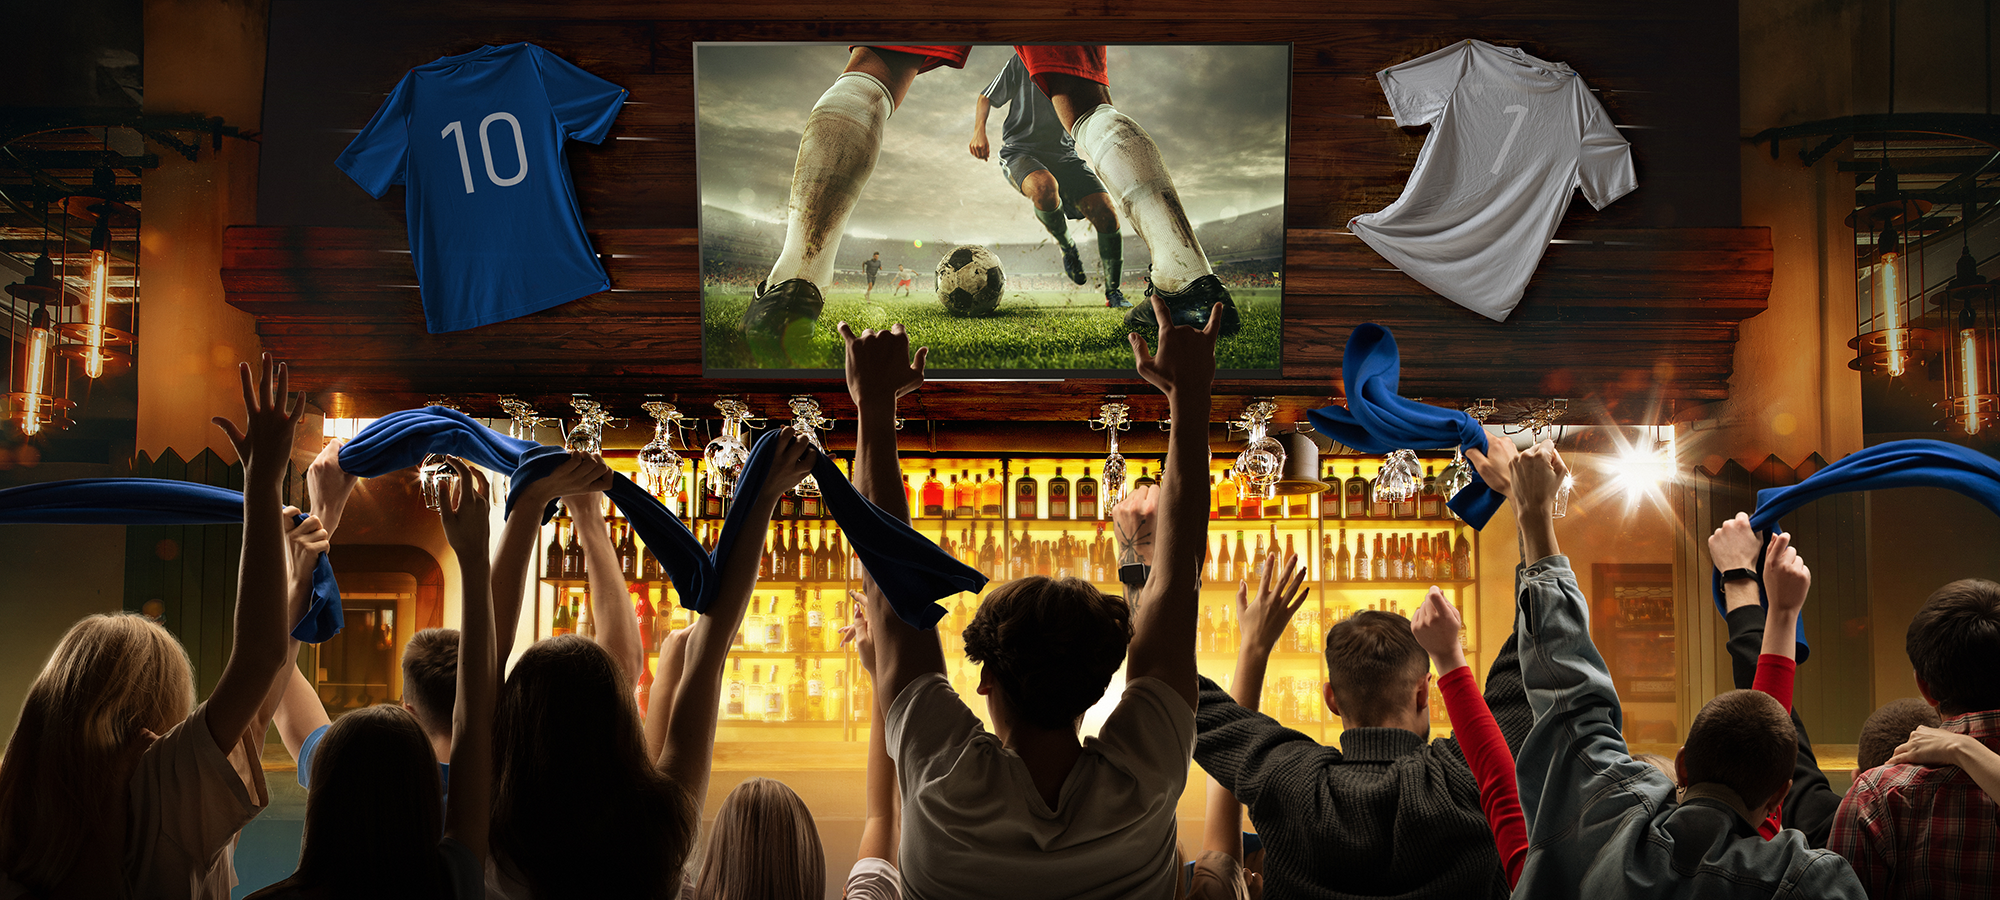 Group of sports fans and friends celebrating while watching a soccer game at a sports bar.